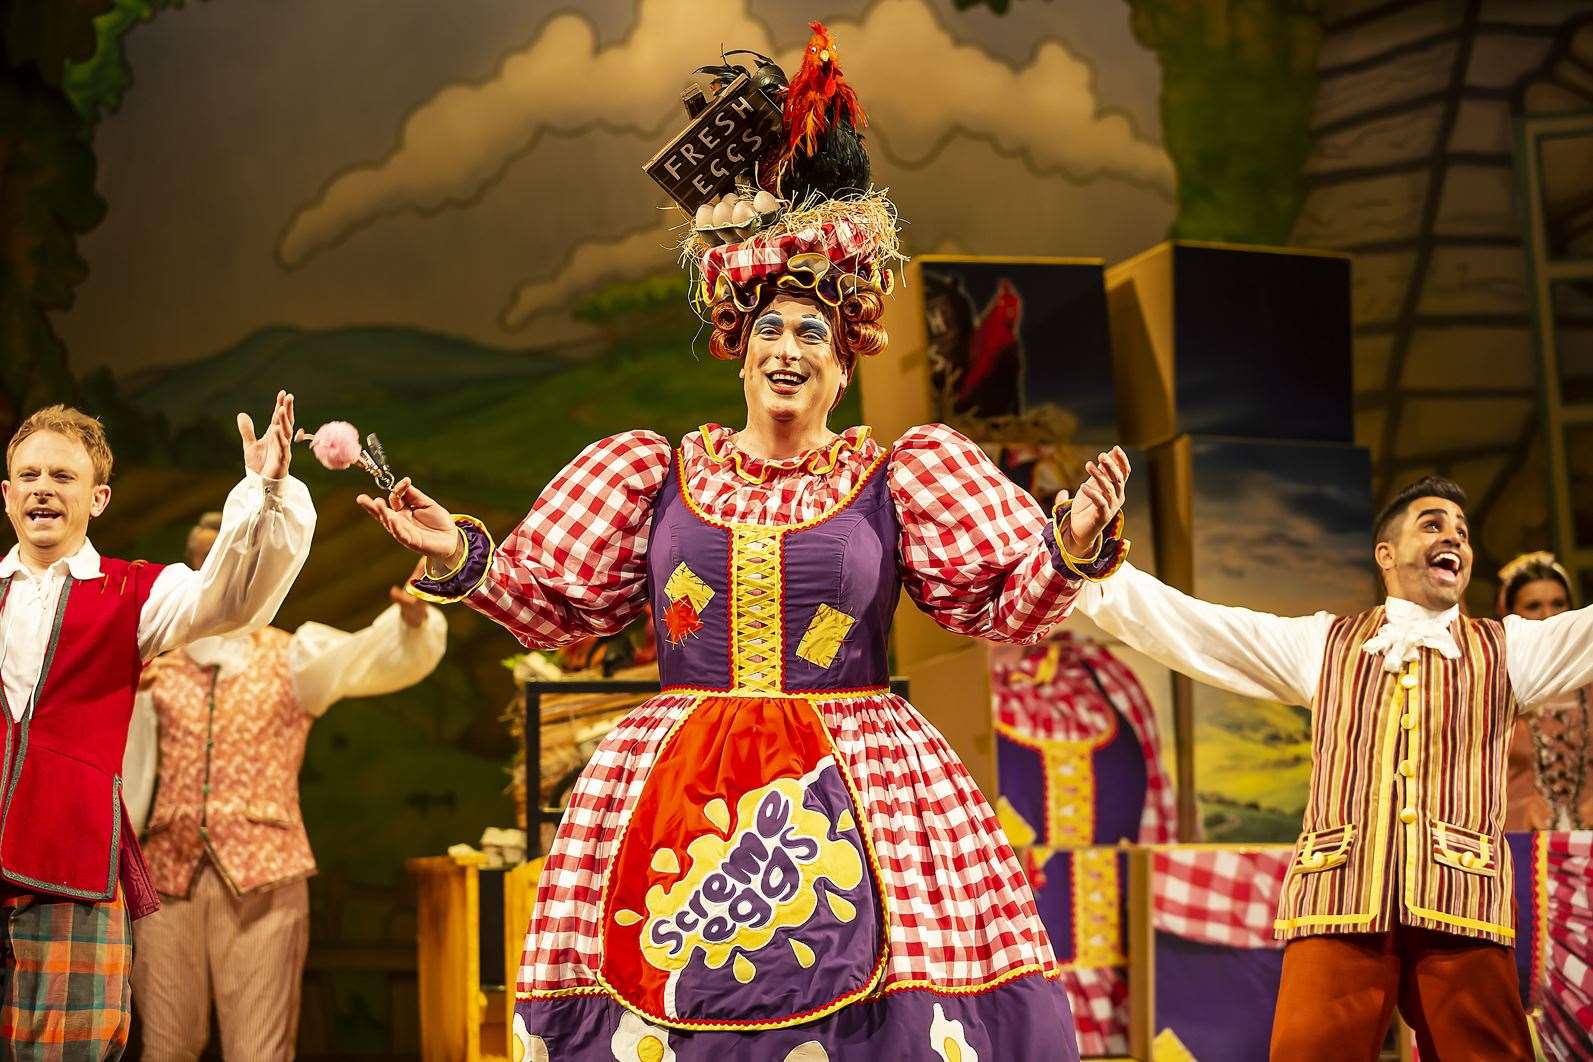 The Marlowe Theatre has already confirmed its panto won't go ahead this year